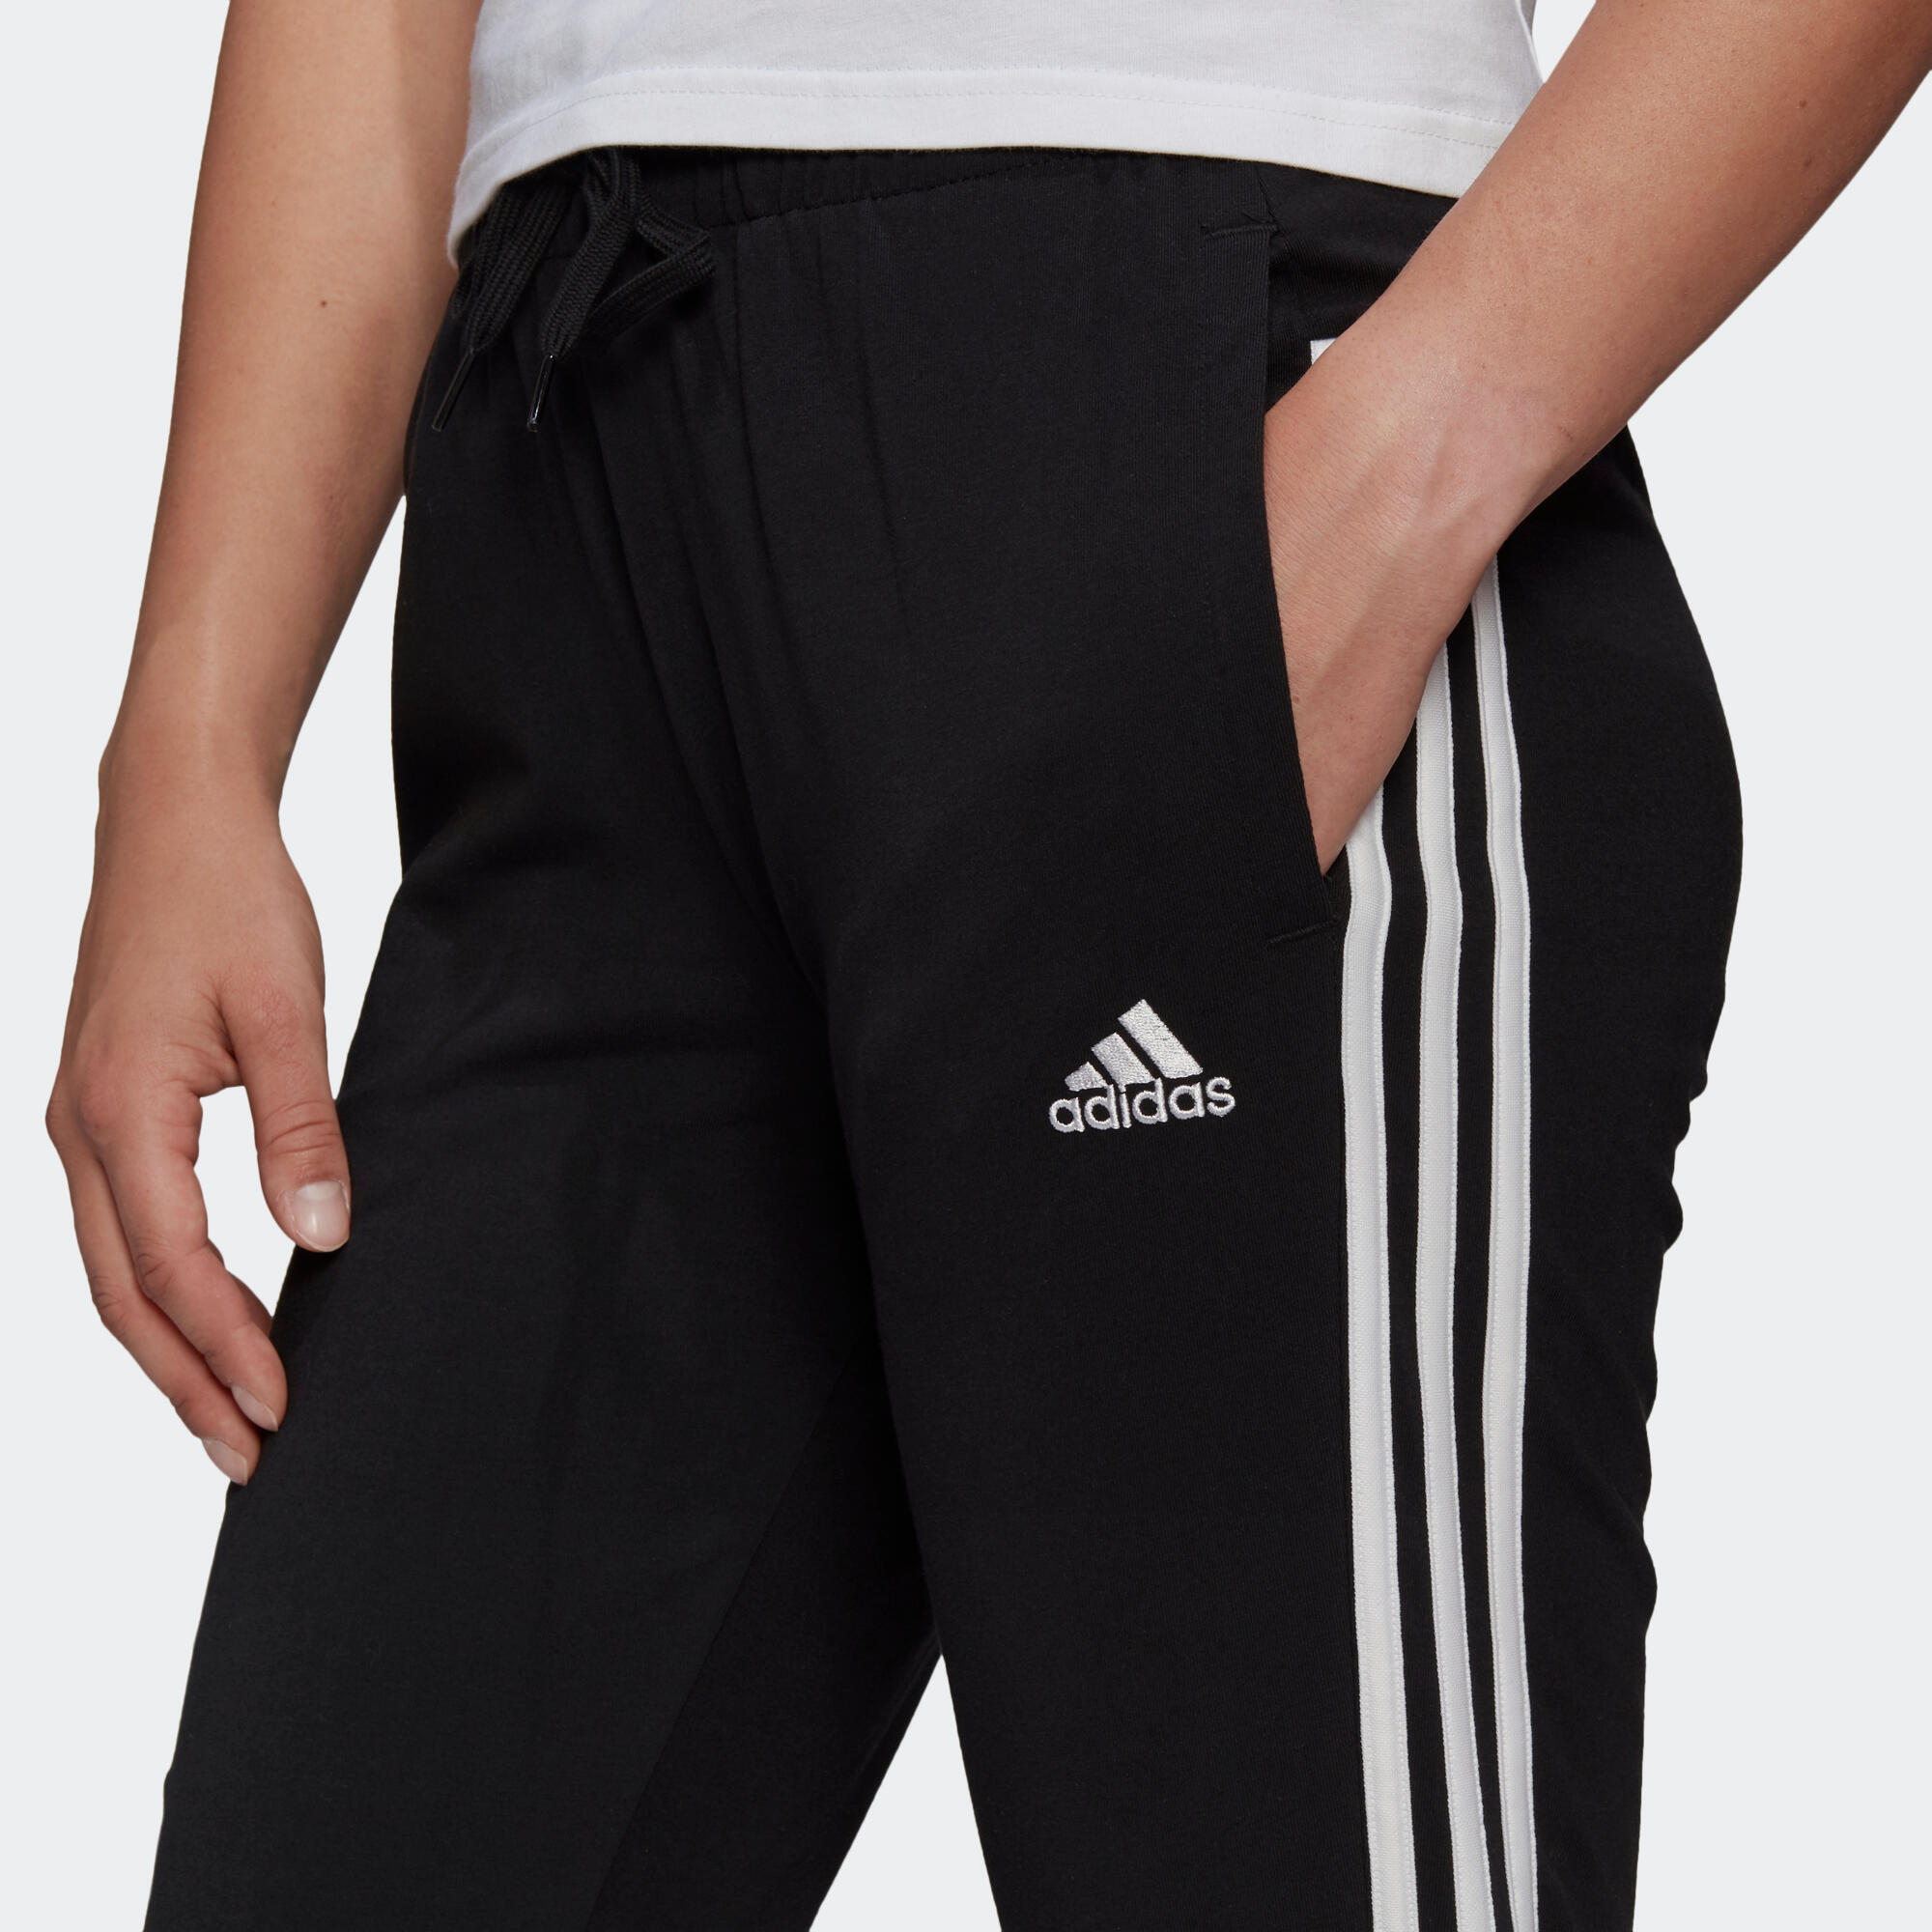 Women's Cotton-Rich Fitted Jogging Fitness Bottoms 3 Stripes - Black 4/6